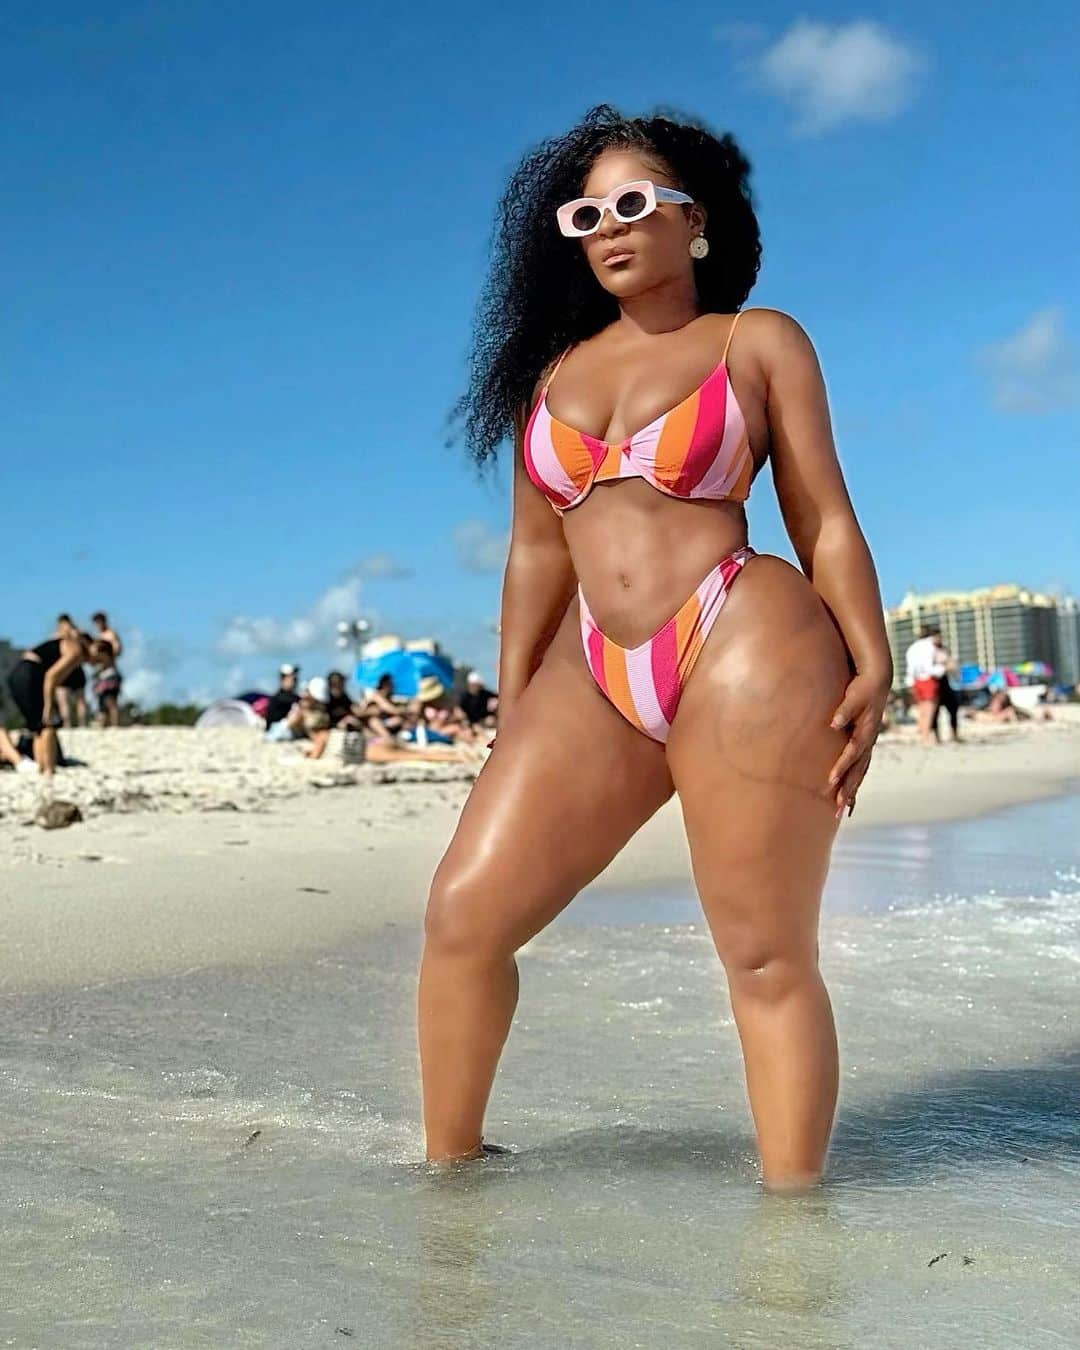 “Only if she was a virgin” – Nkechi Blessing’s ex-lover, Falegan reacts to Destiny Etiko’s bikini photos